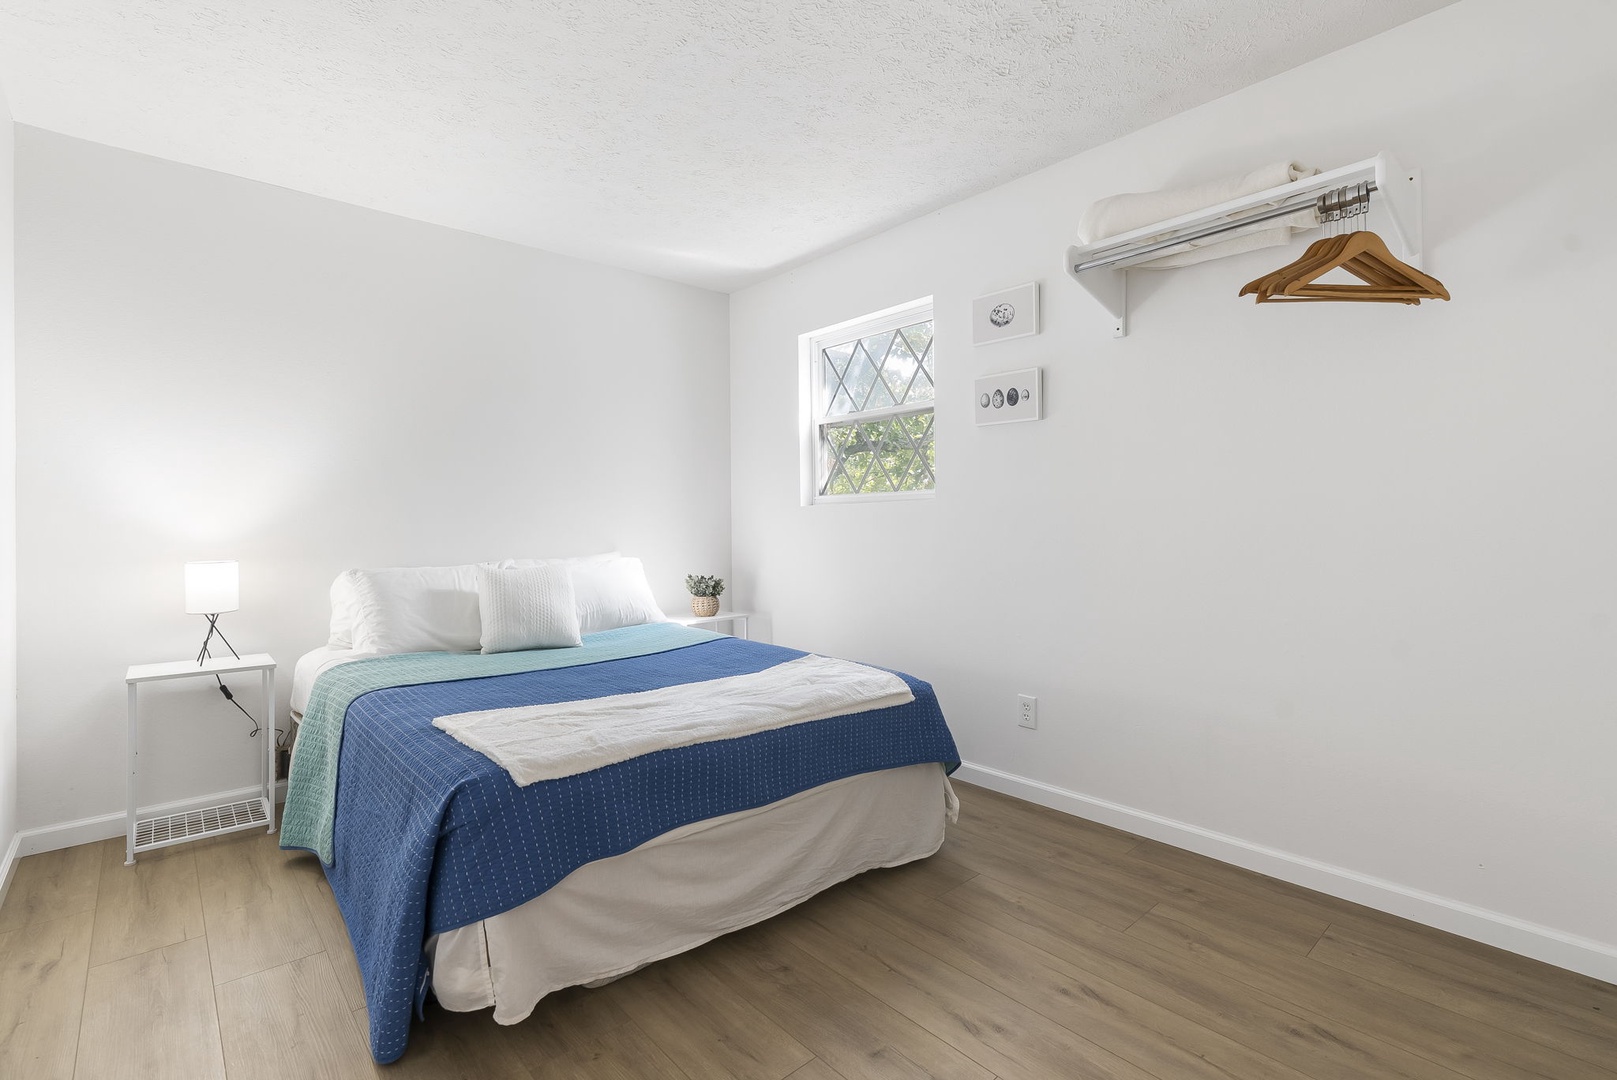 Unit 45: This tranquil 2nd floor bedroom offers a queen-sized bed